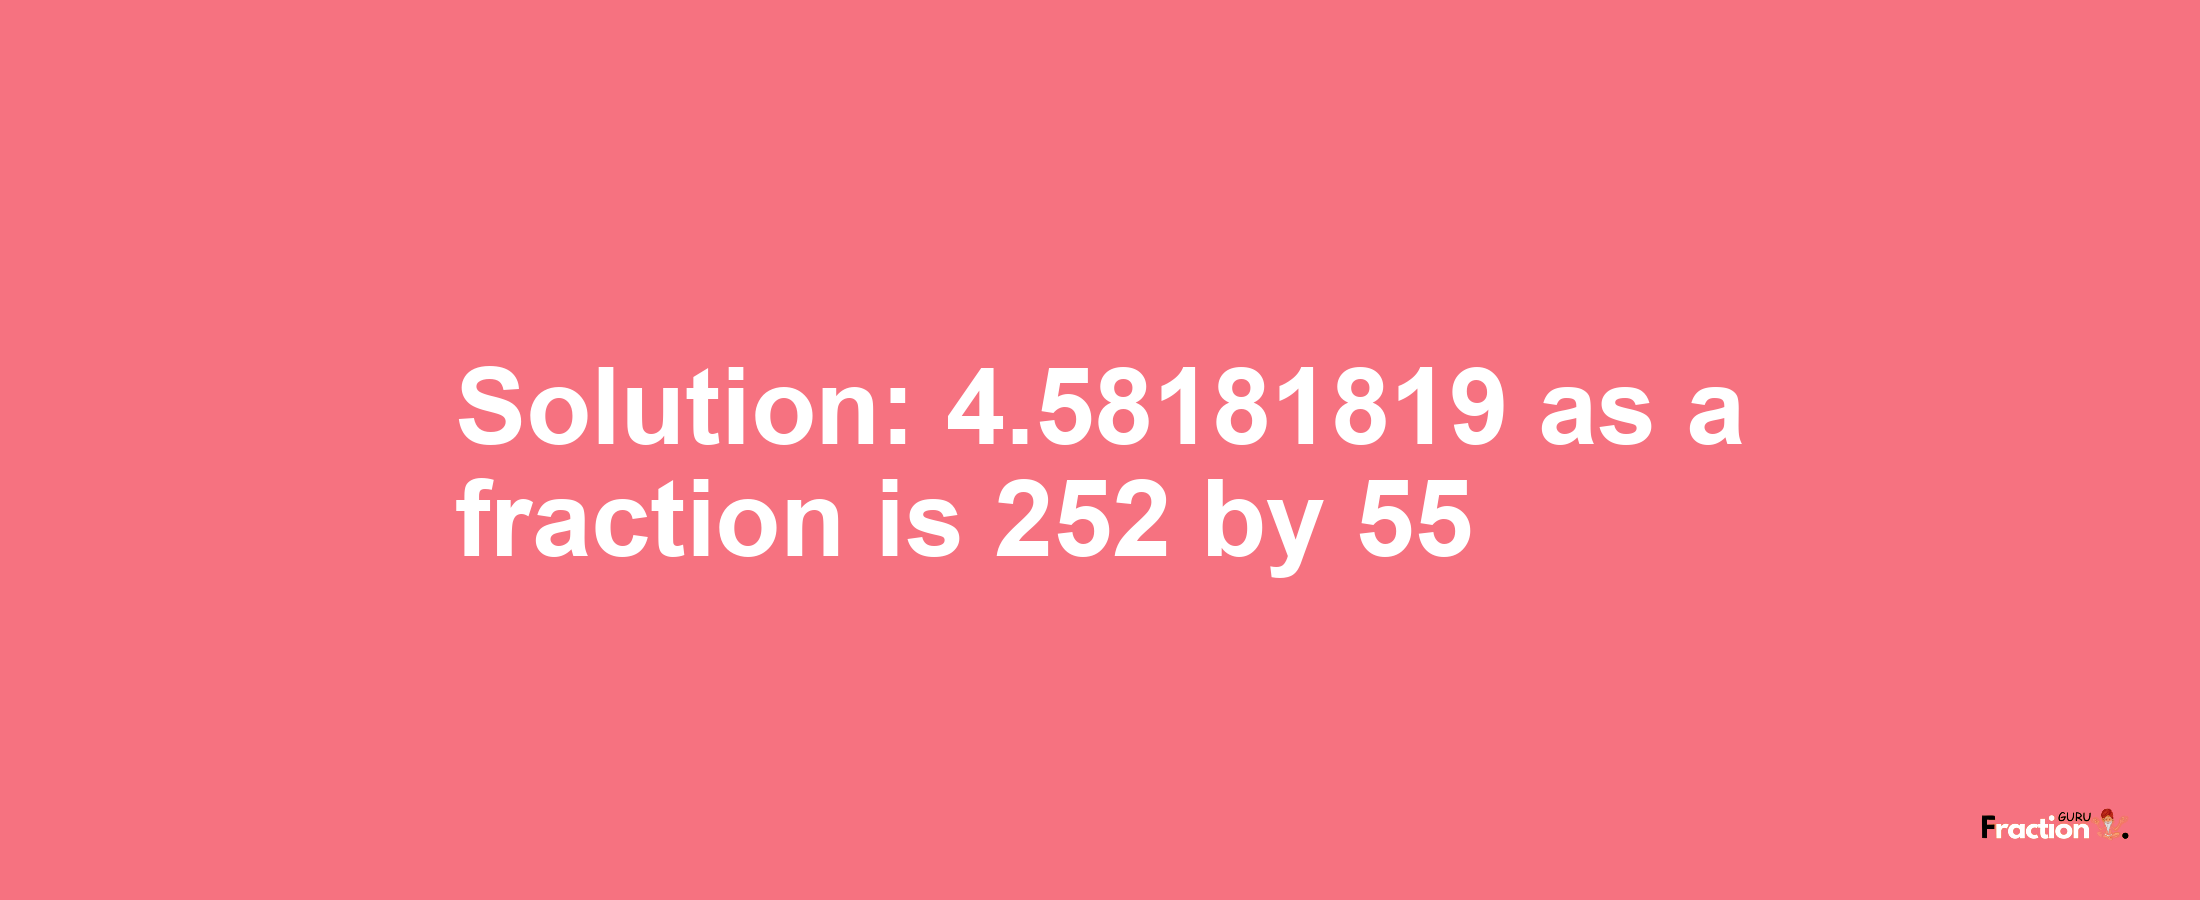 Solution:4.58181819 as a fraction is 252/55